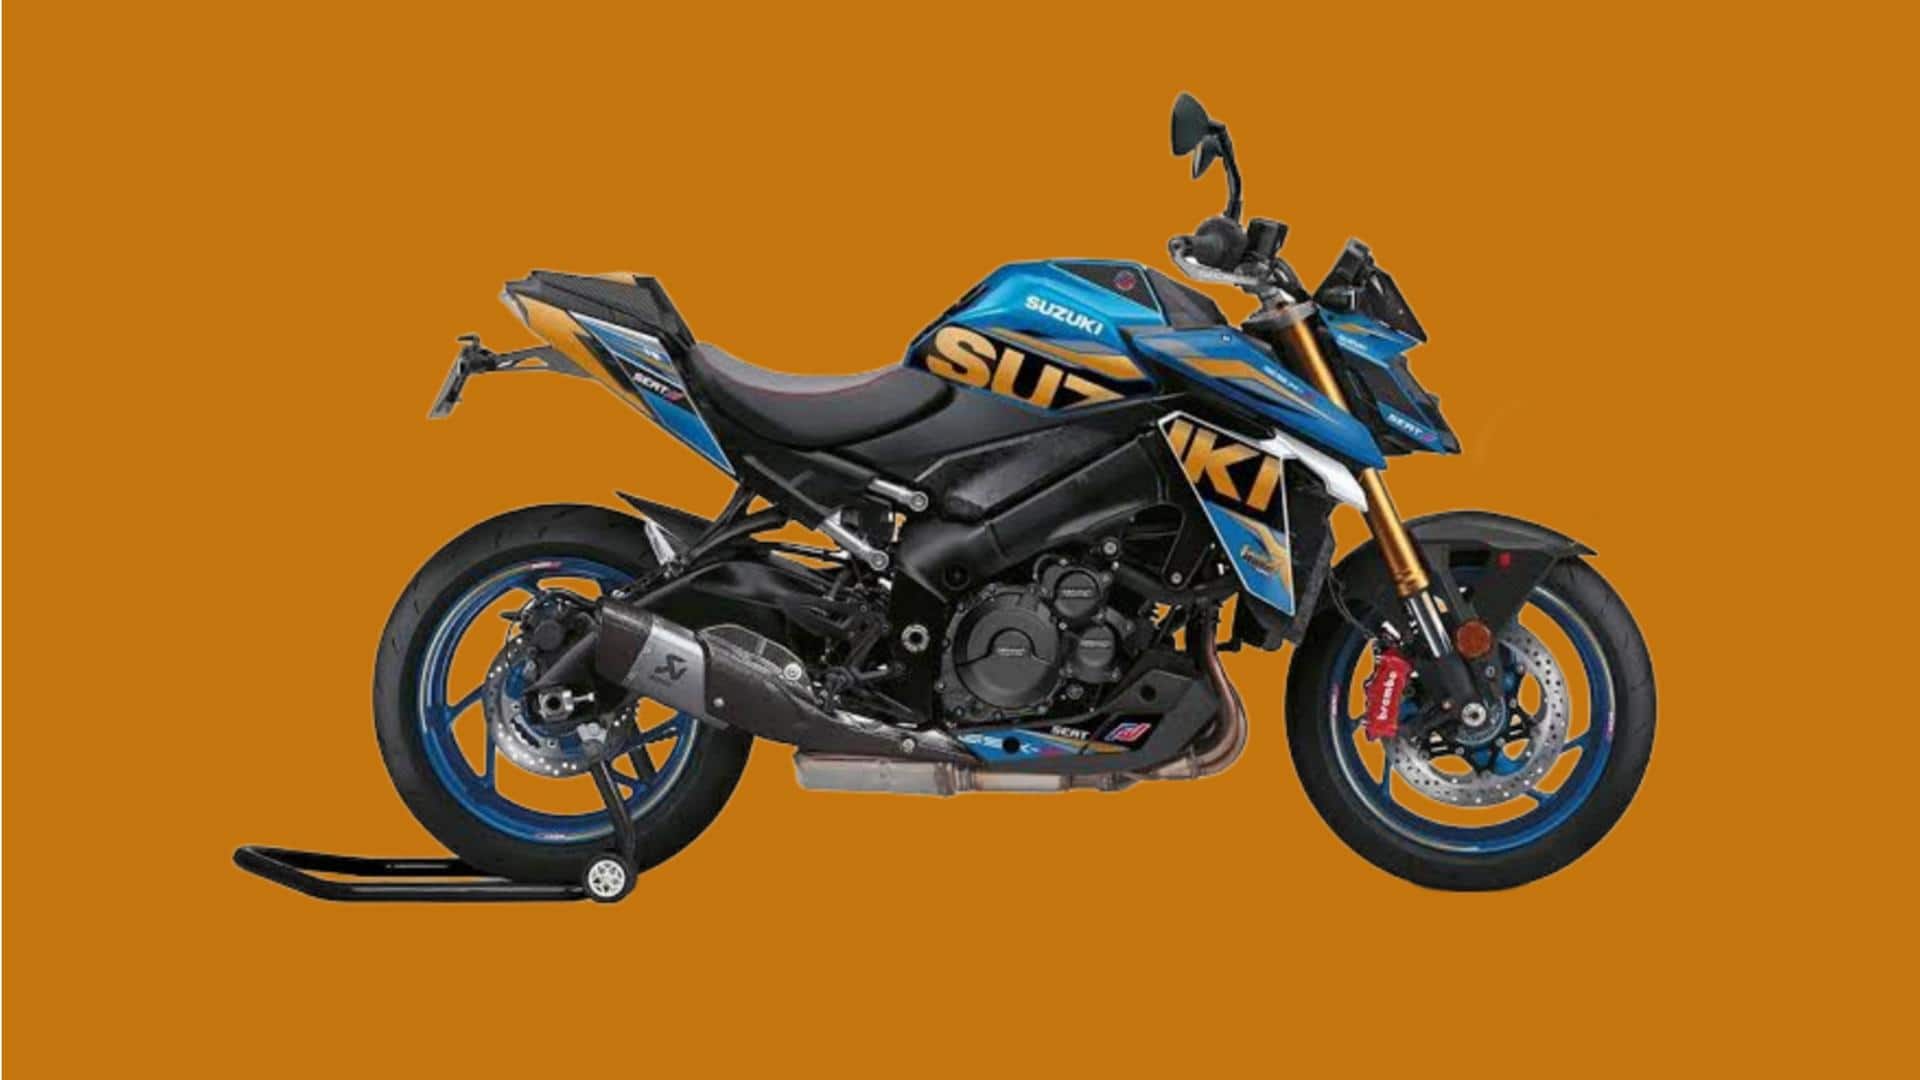 Top features of limited-run Suzuki GSX-S1000 Race Edition streetfighter